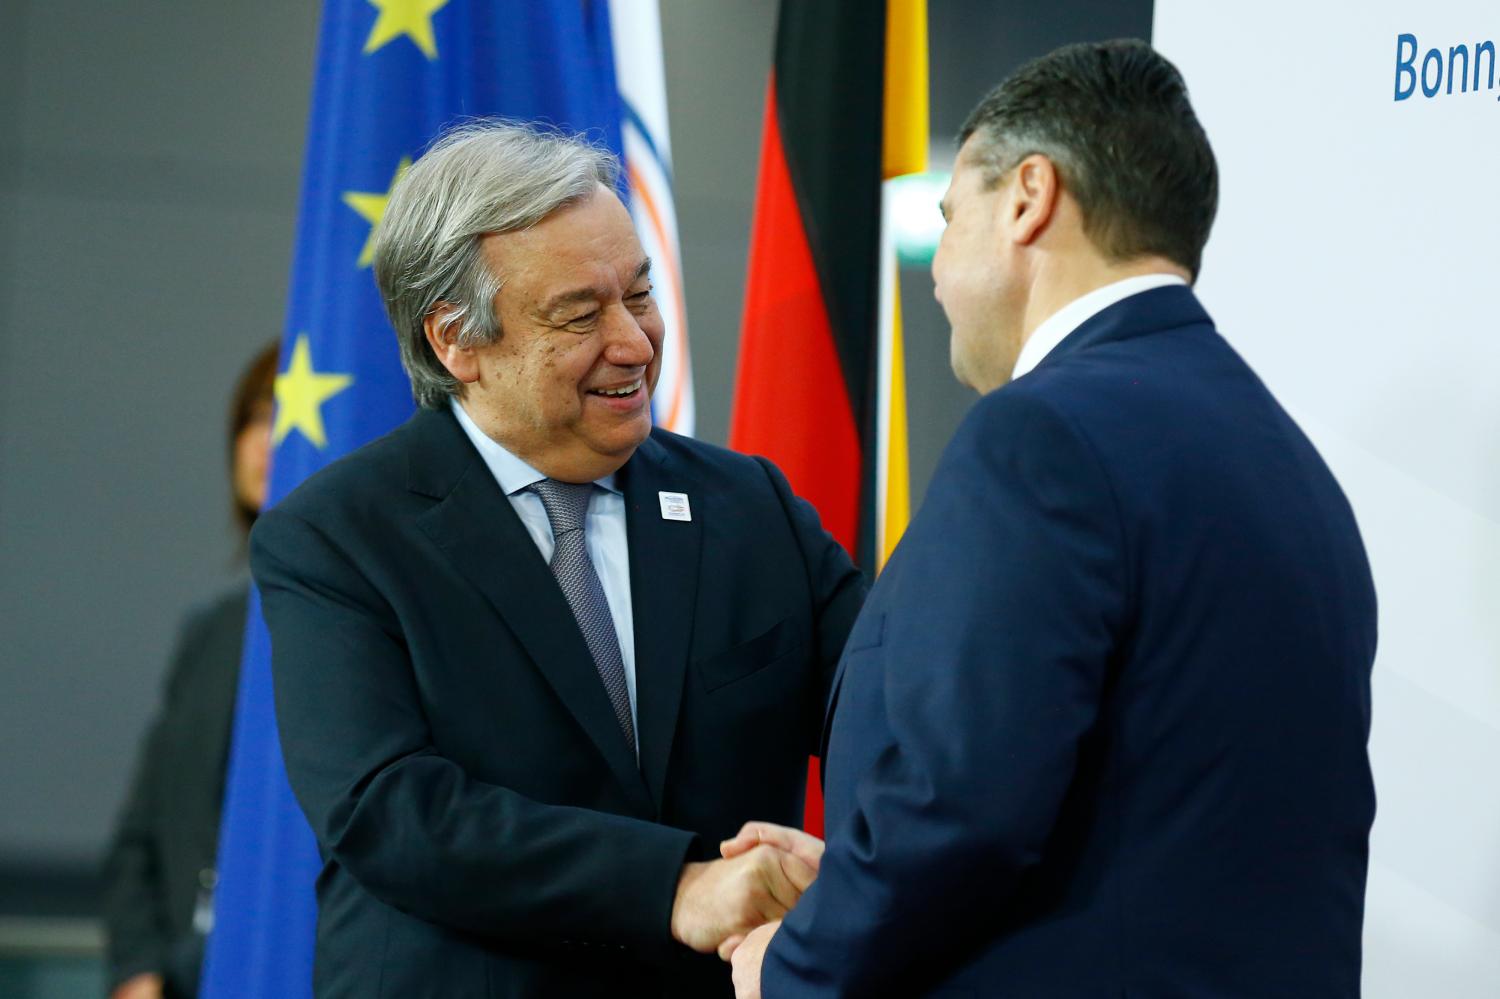 German Foreign Minister Gabriel welcomes United Nations Secretary General Guterres prior to the G-20 Foreign Ministers meeting in Bonn